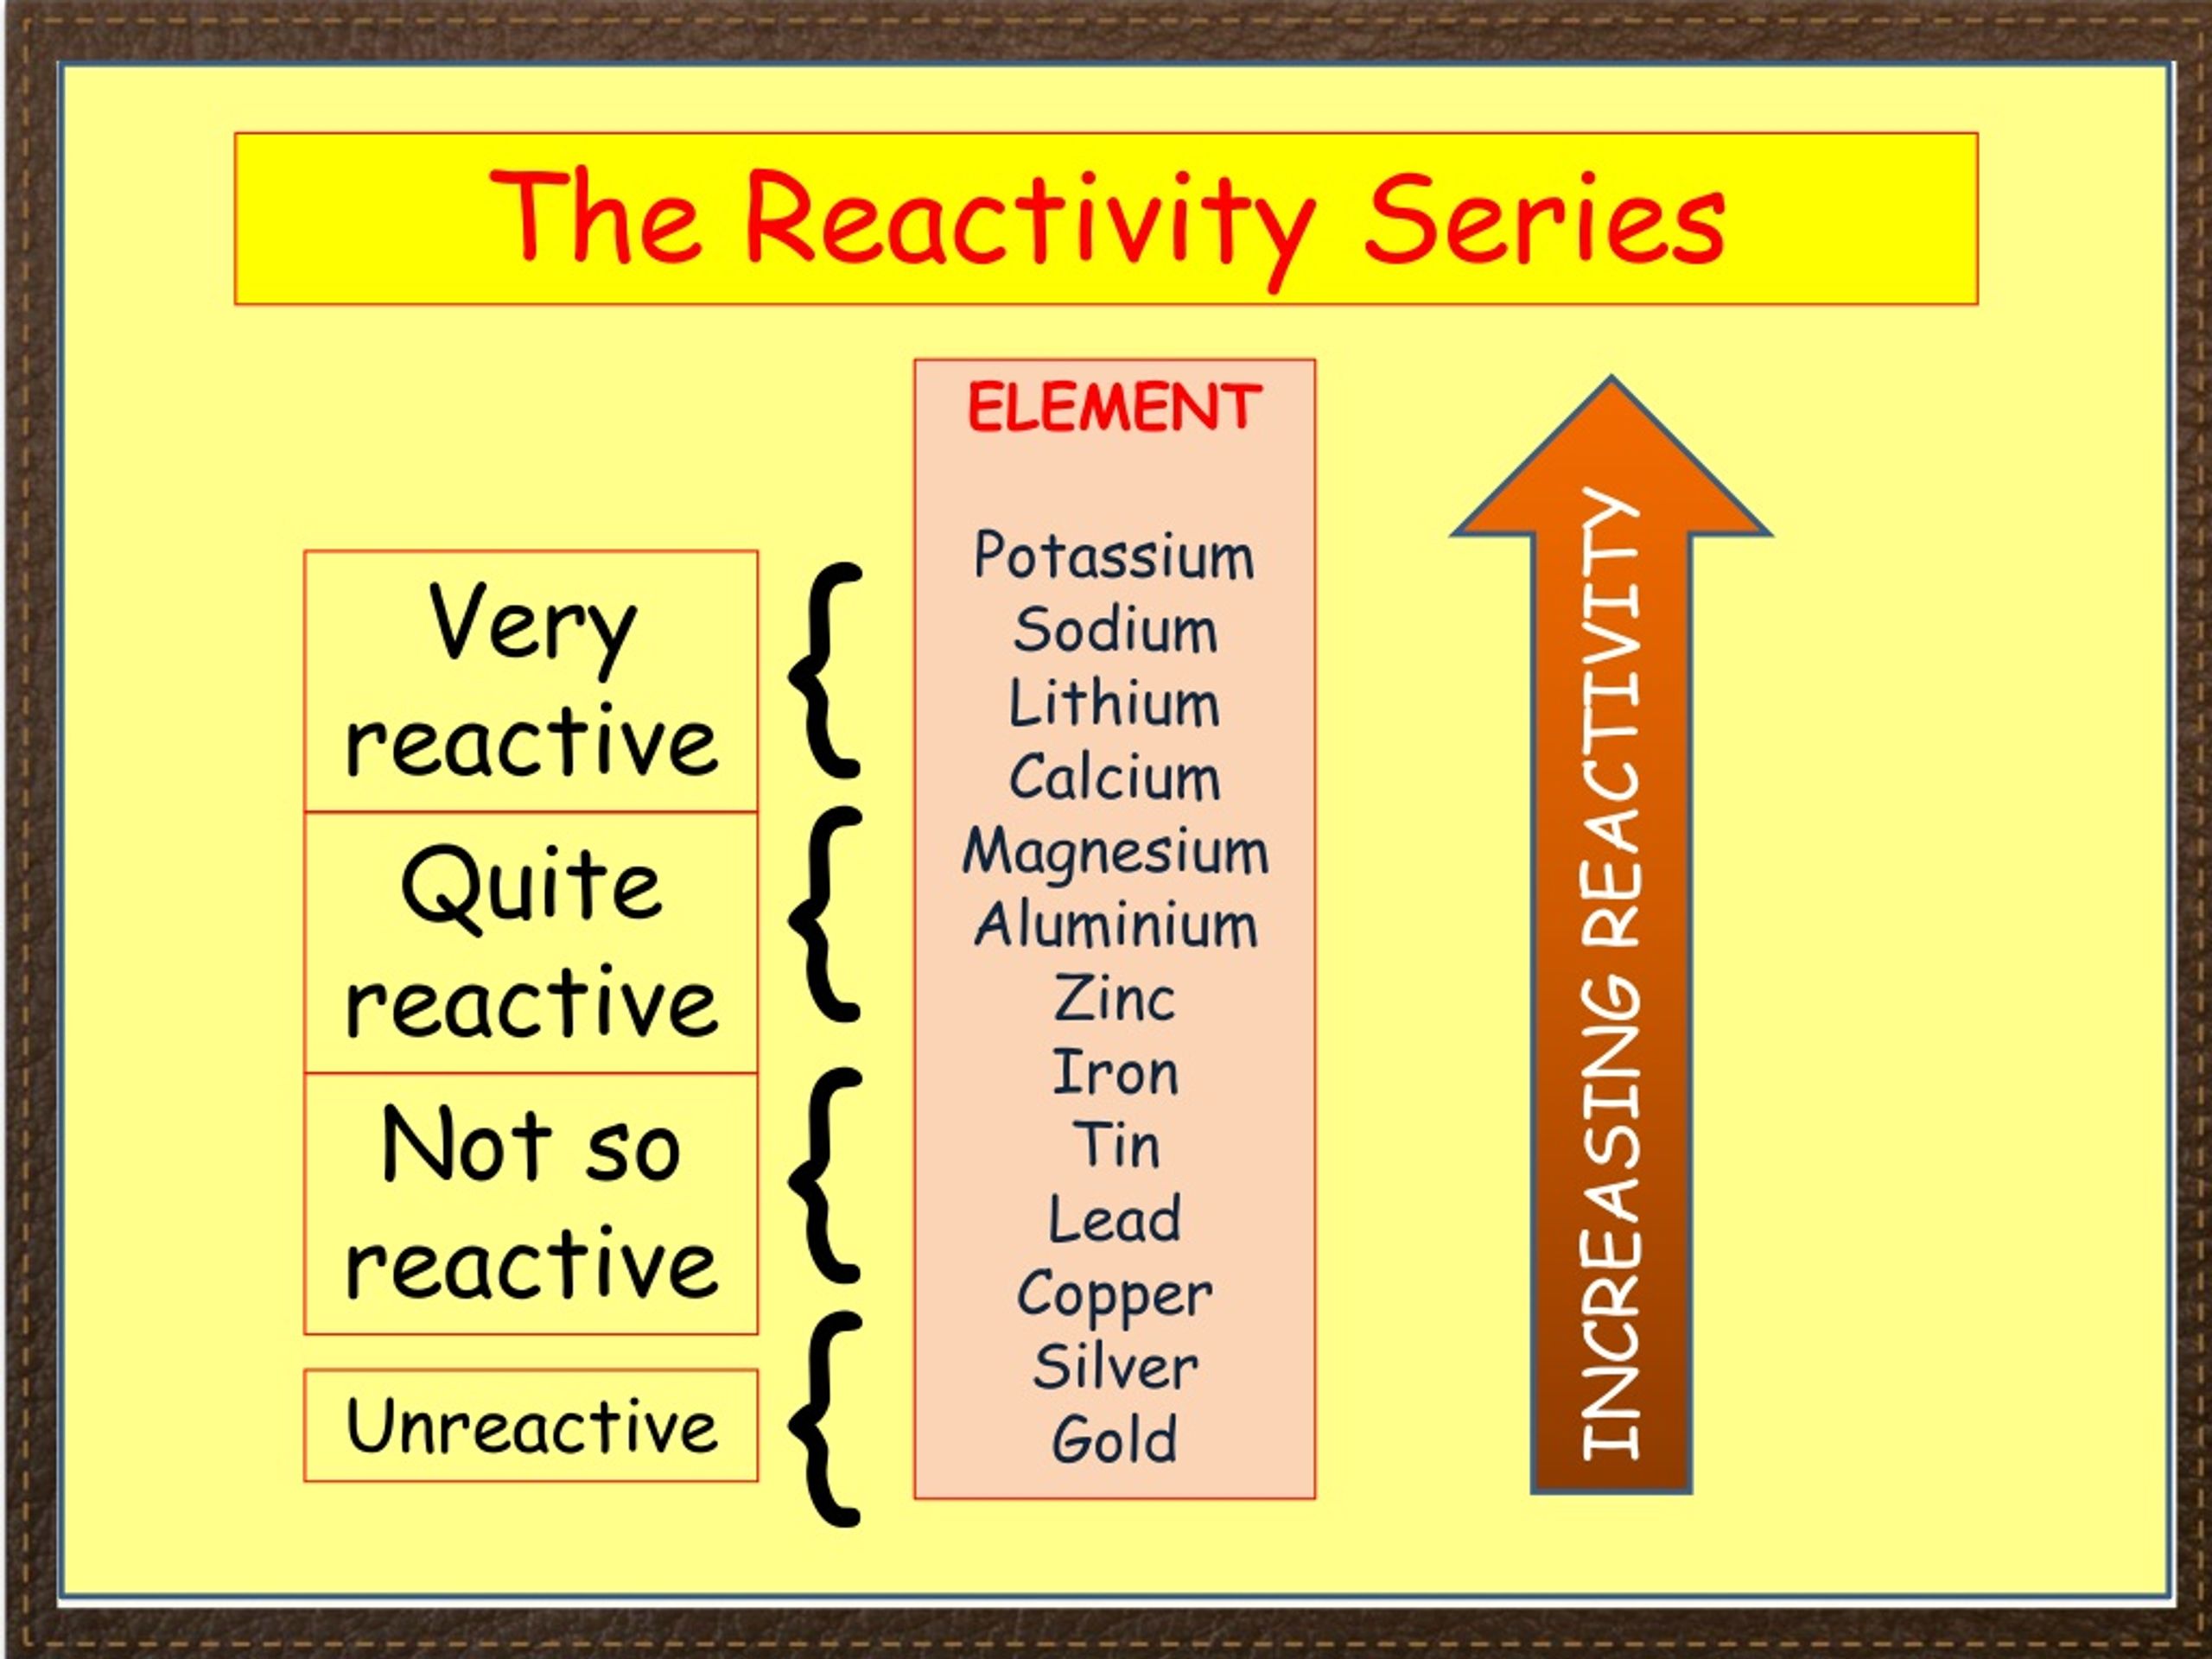 reactivity with water